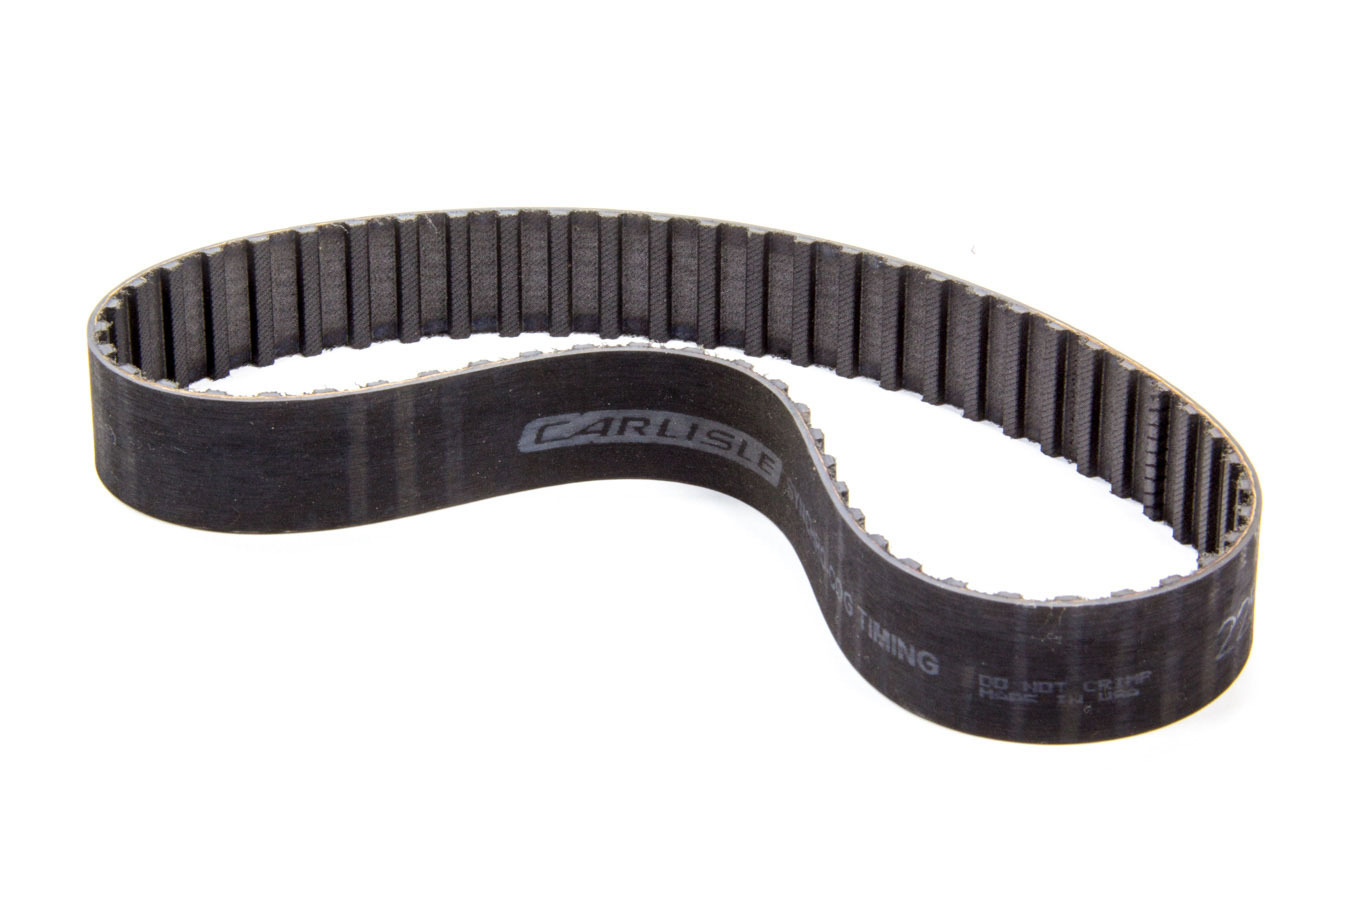 Stock Car Products 240L100 Gilmer Drive Belt, 24.000 in Long, 1 in Wide, 3/8 in Pitch, Each